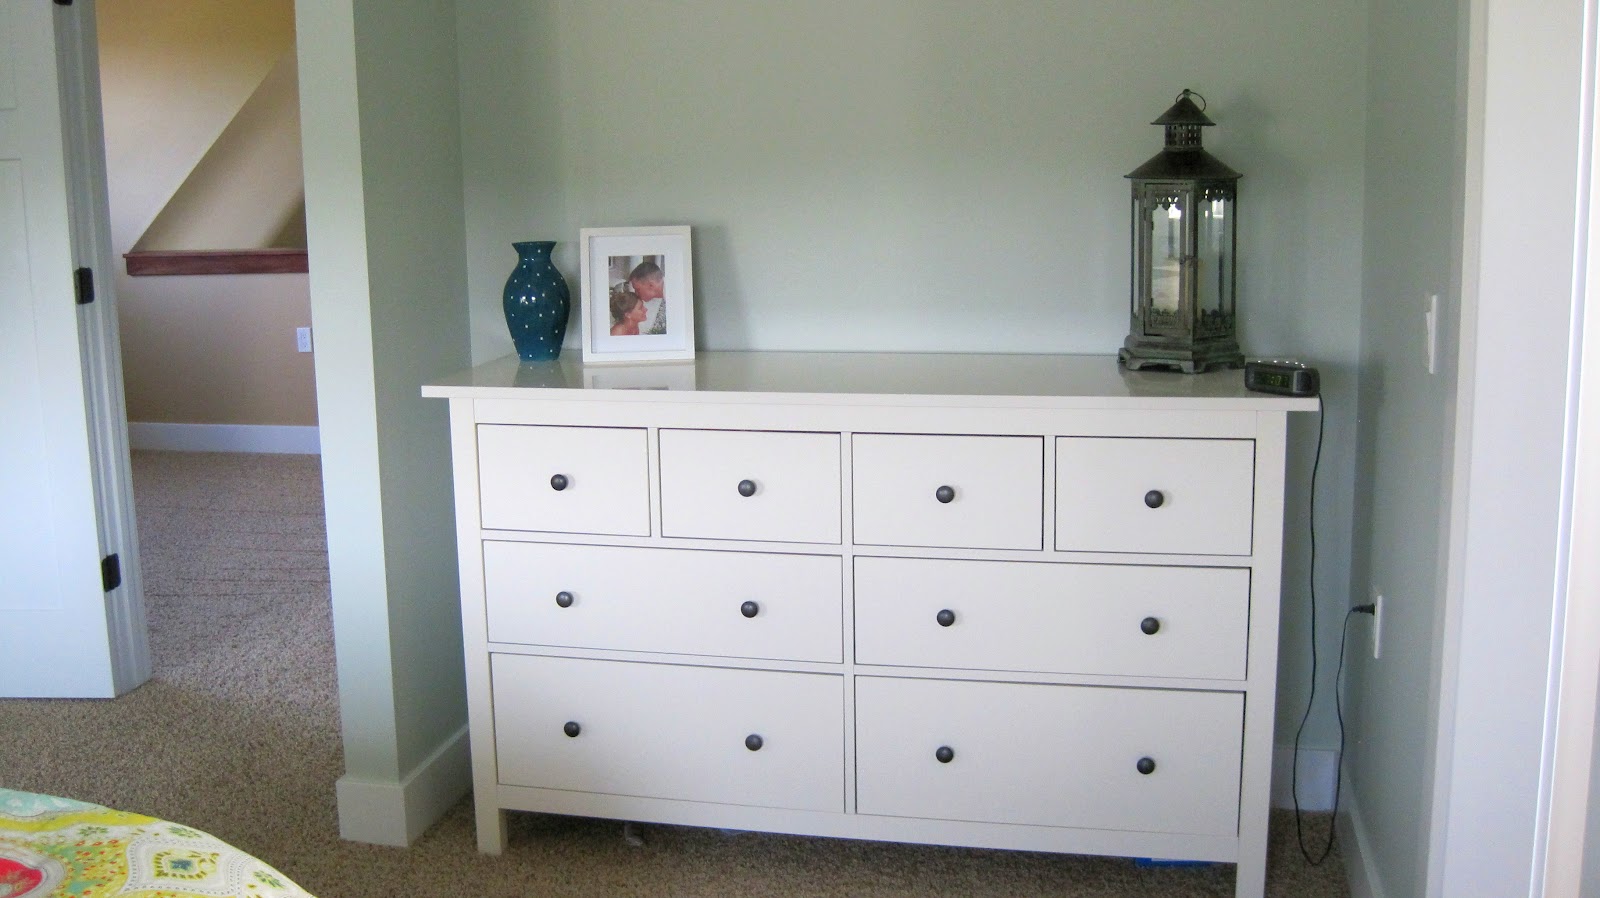 Making out master bedroom feel like a retreat with calming colors and ...